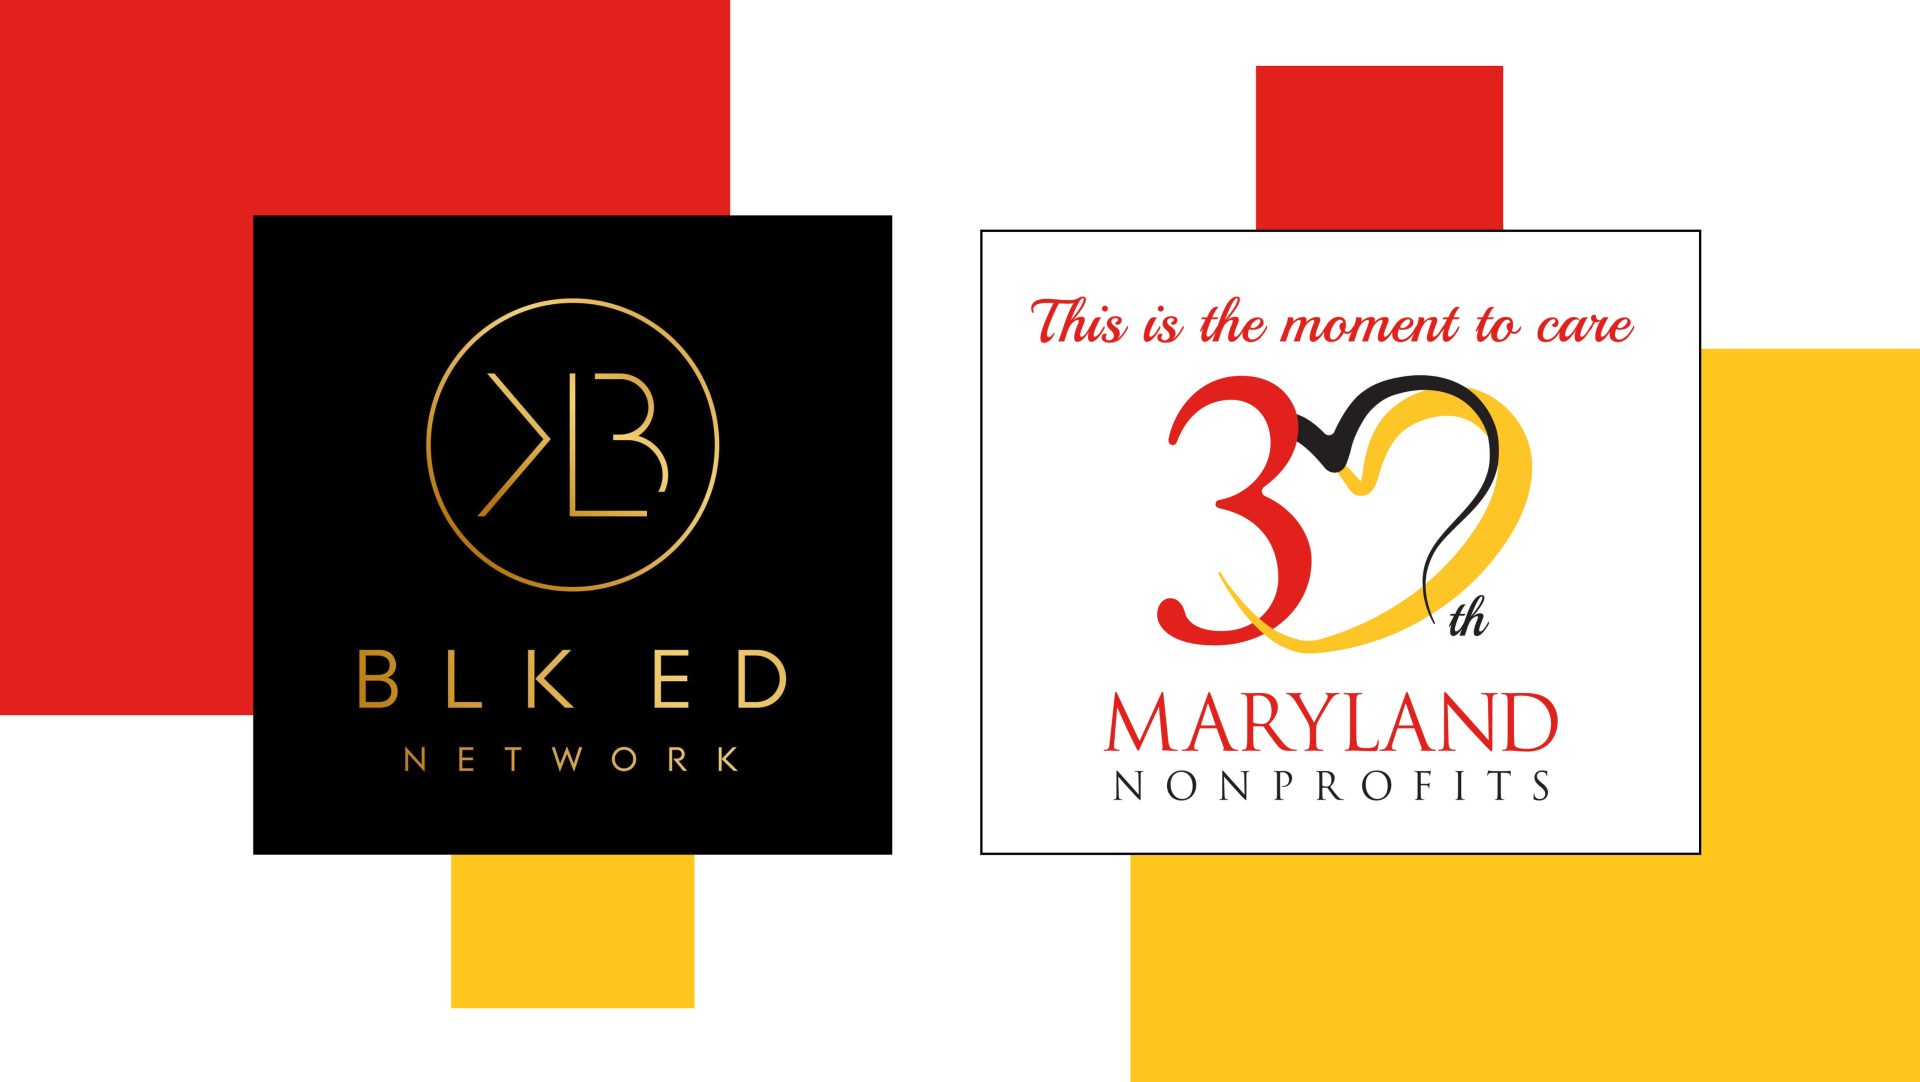 Maryland Nonprofits partners with Black Executive Directors Network for new member benefit